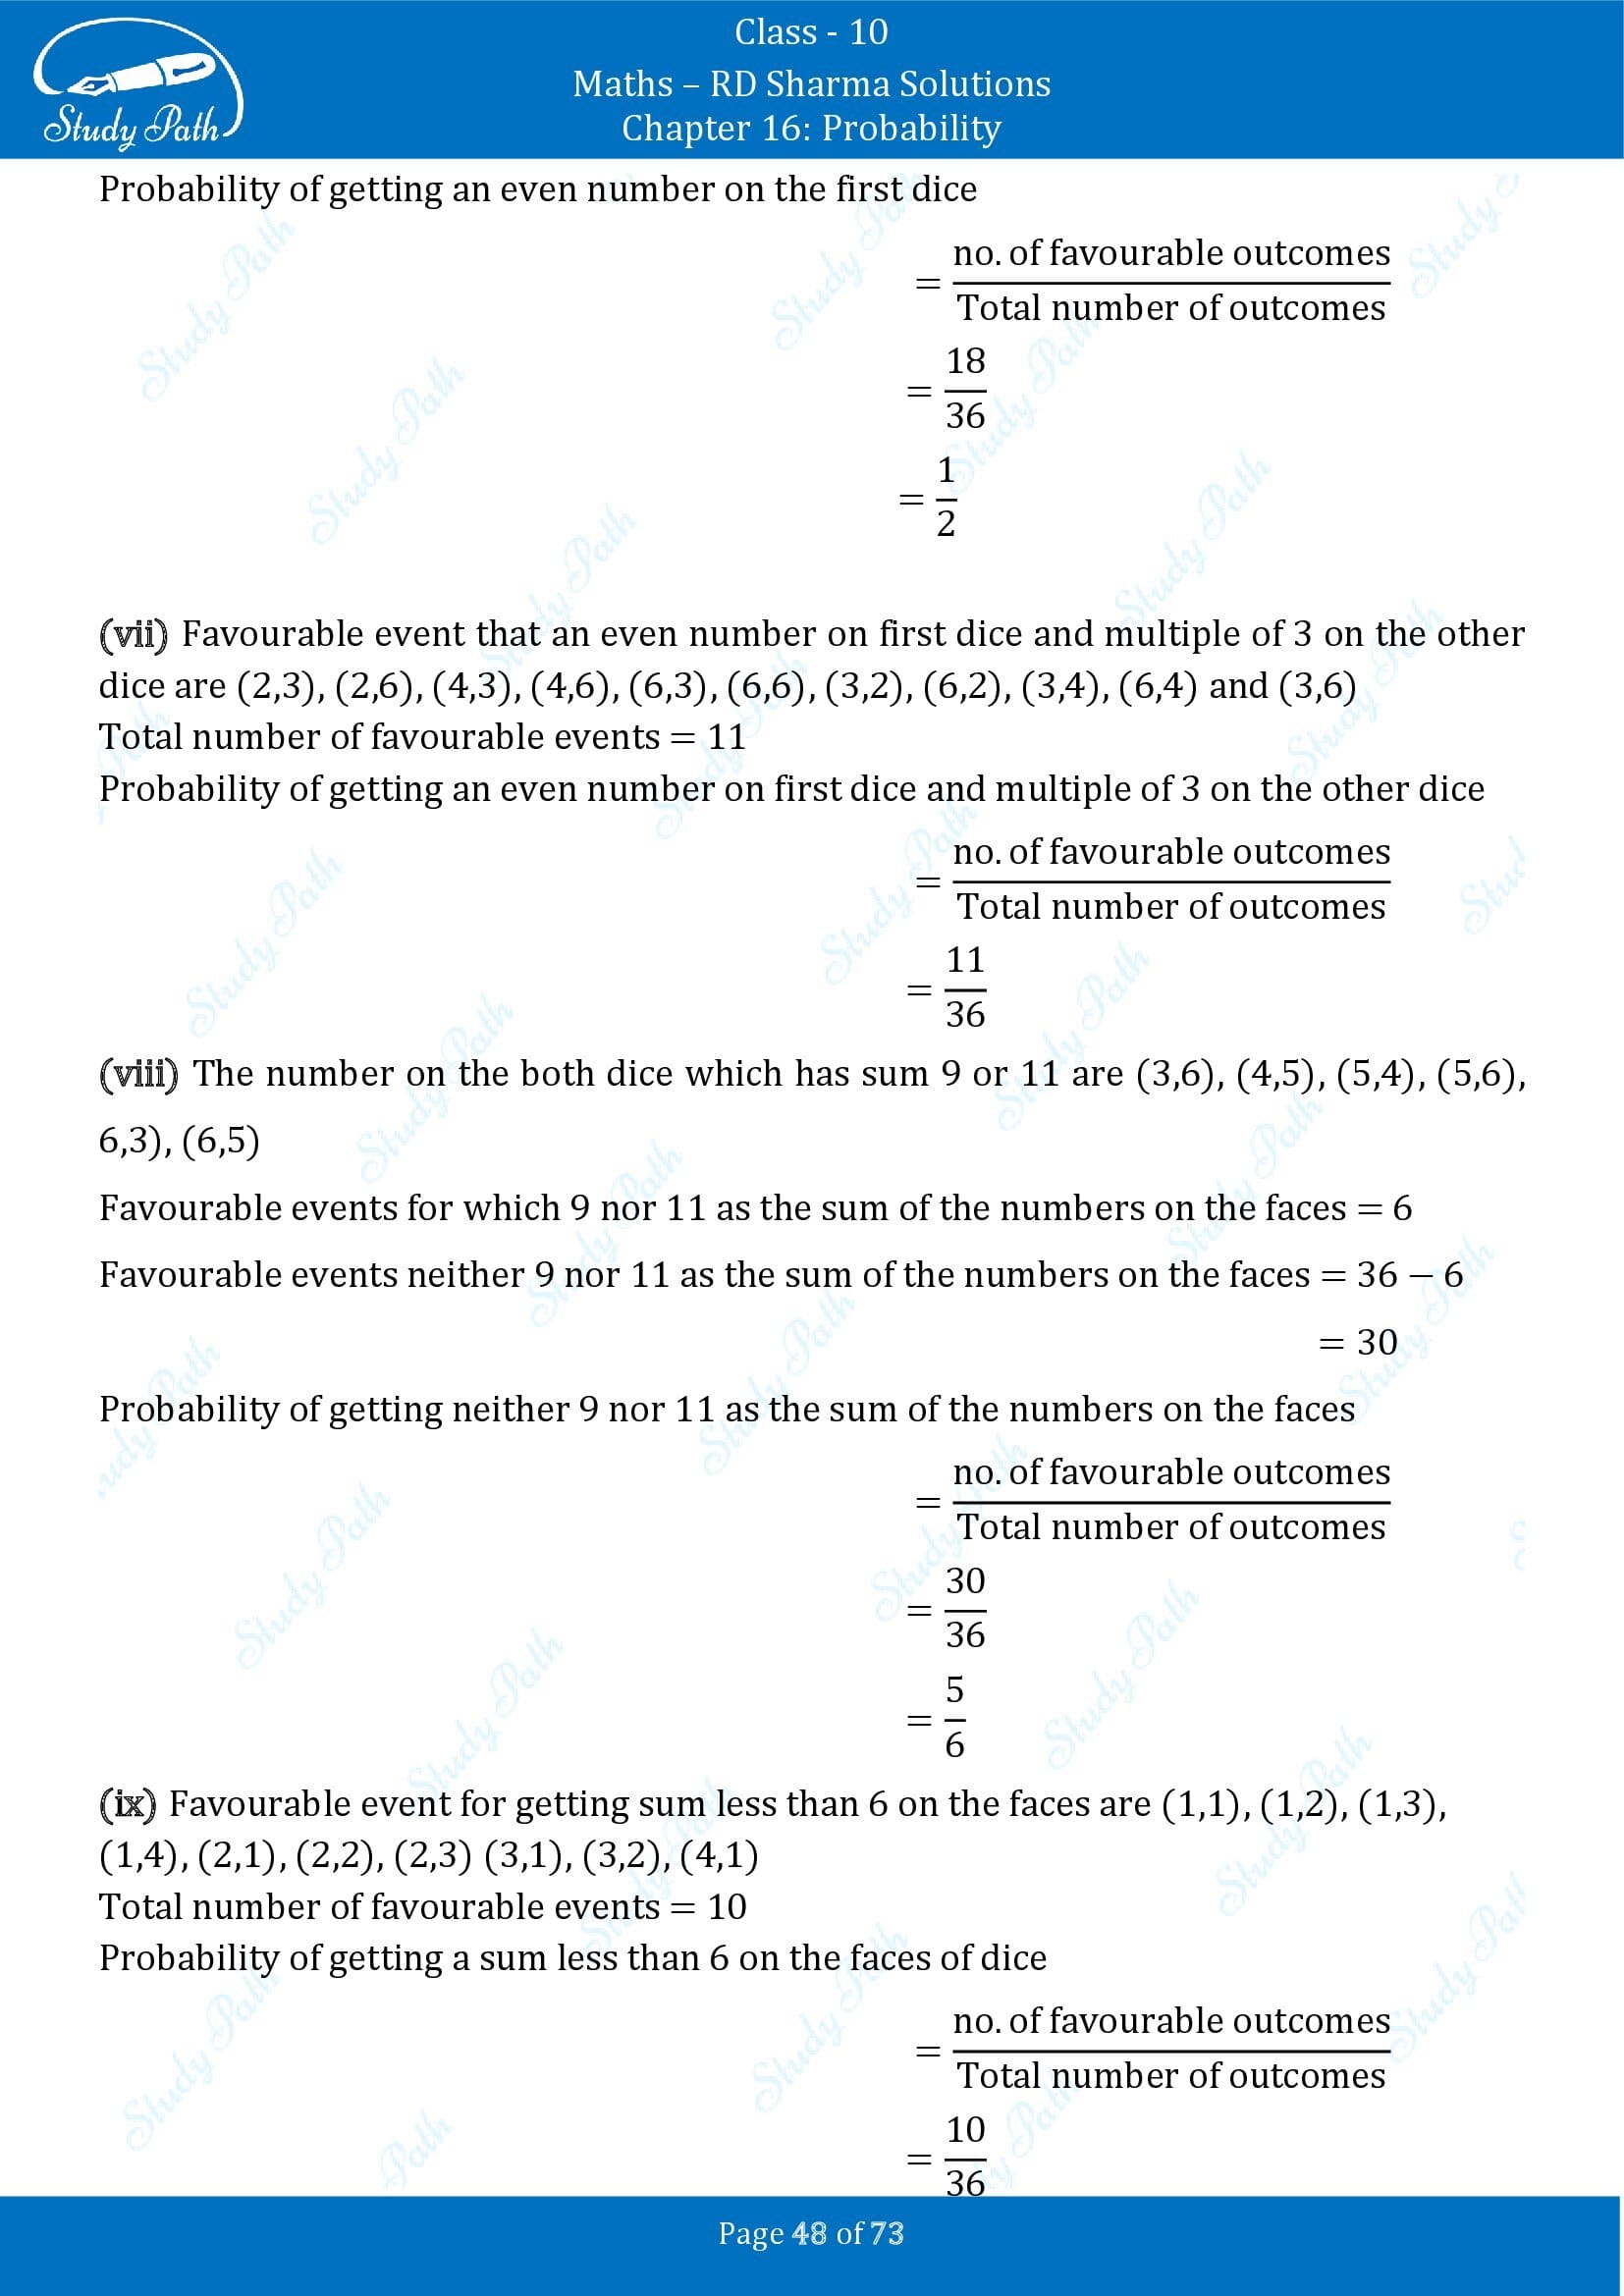 RD Sharma Solutions Class 10 Chapter 16 Probability Exercise 16.1 00048